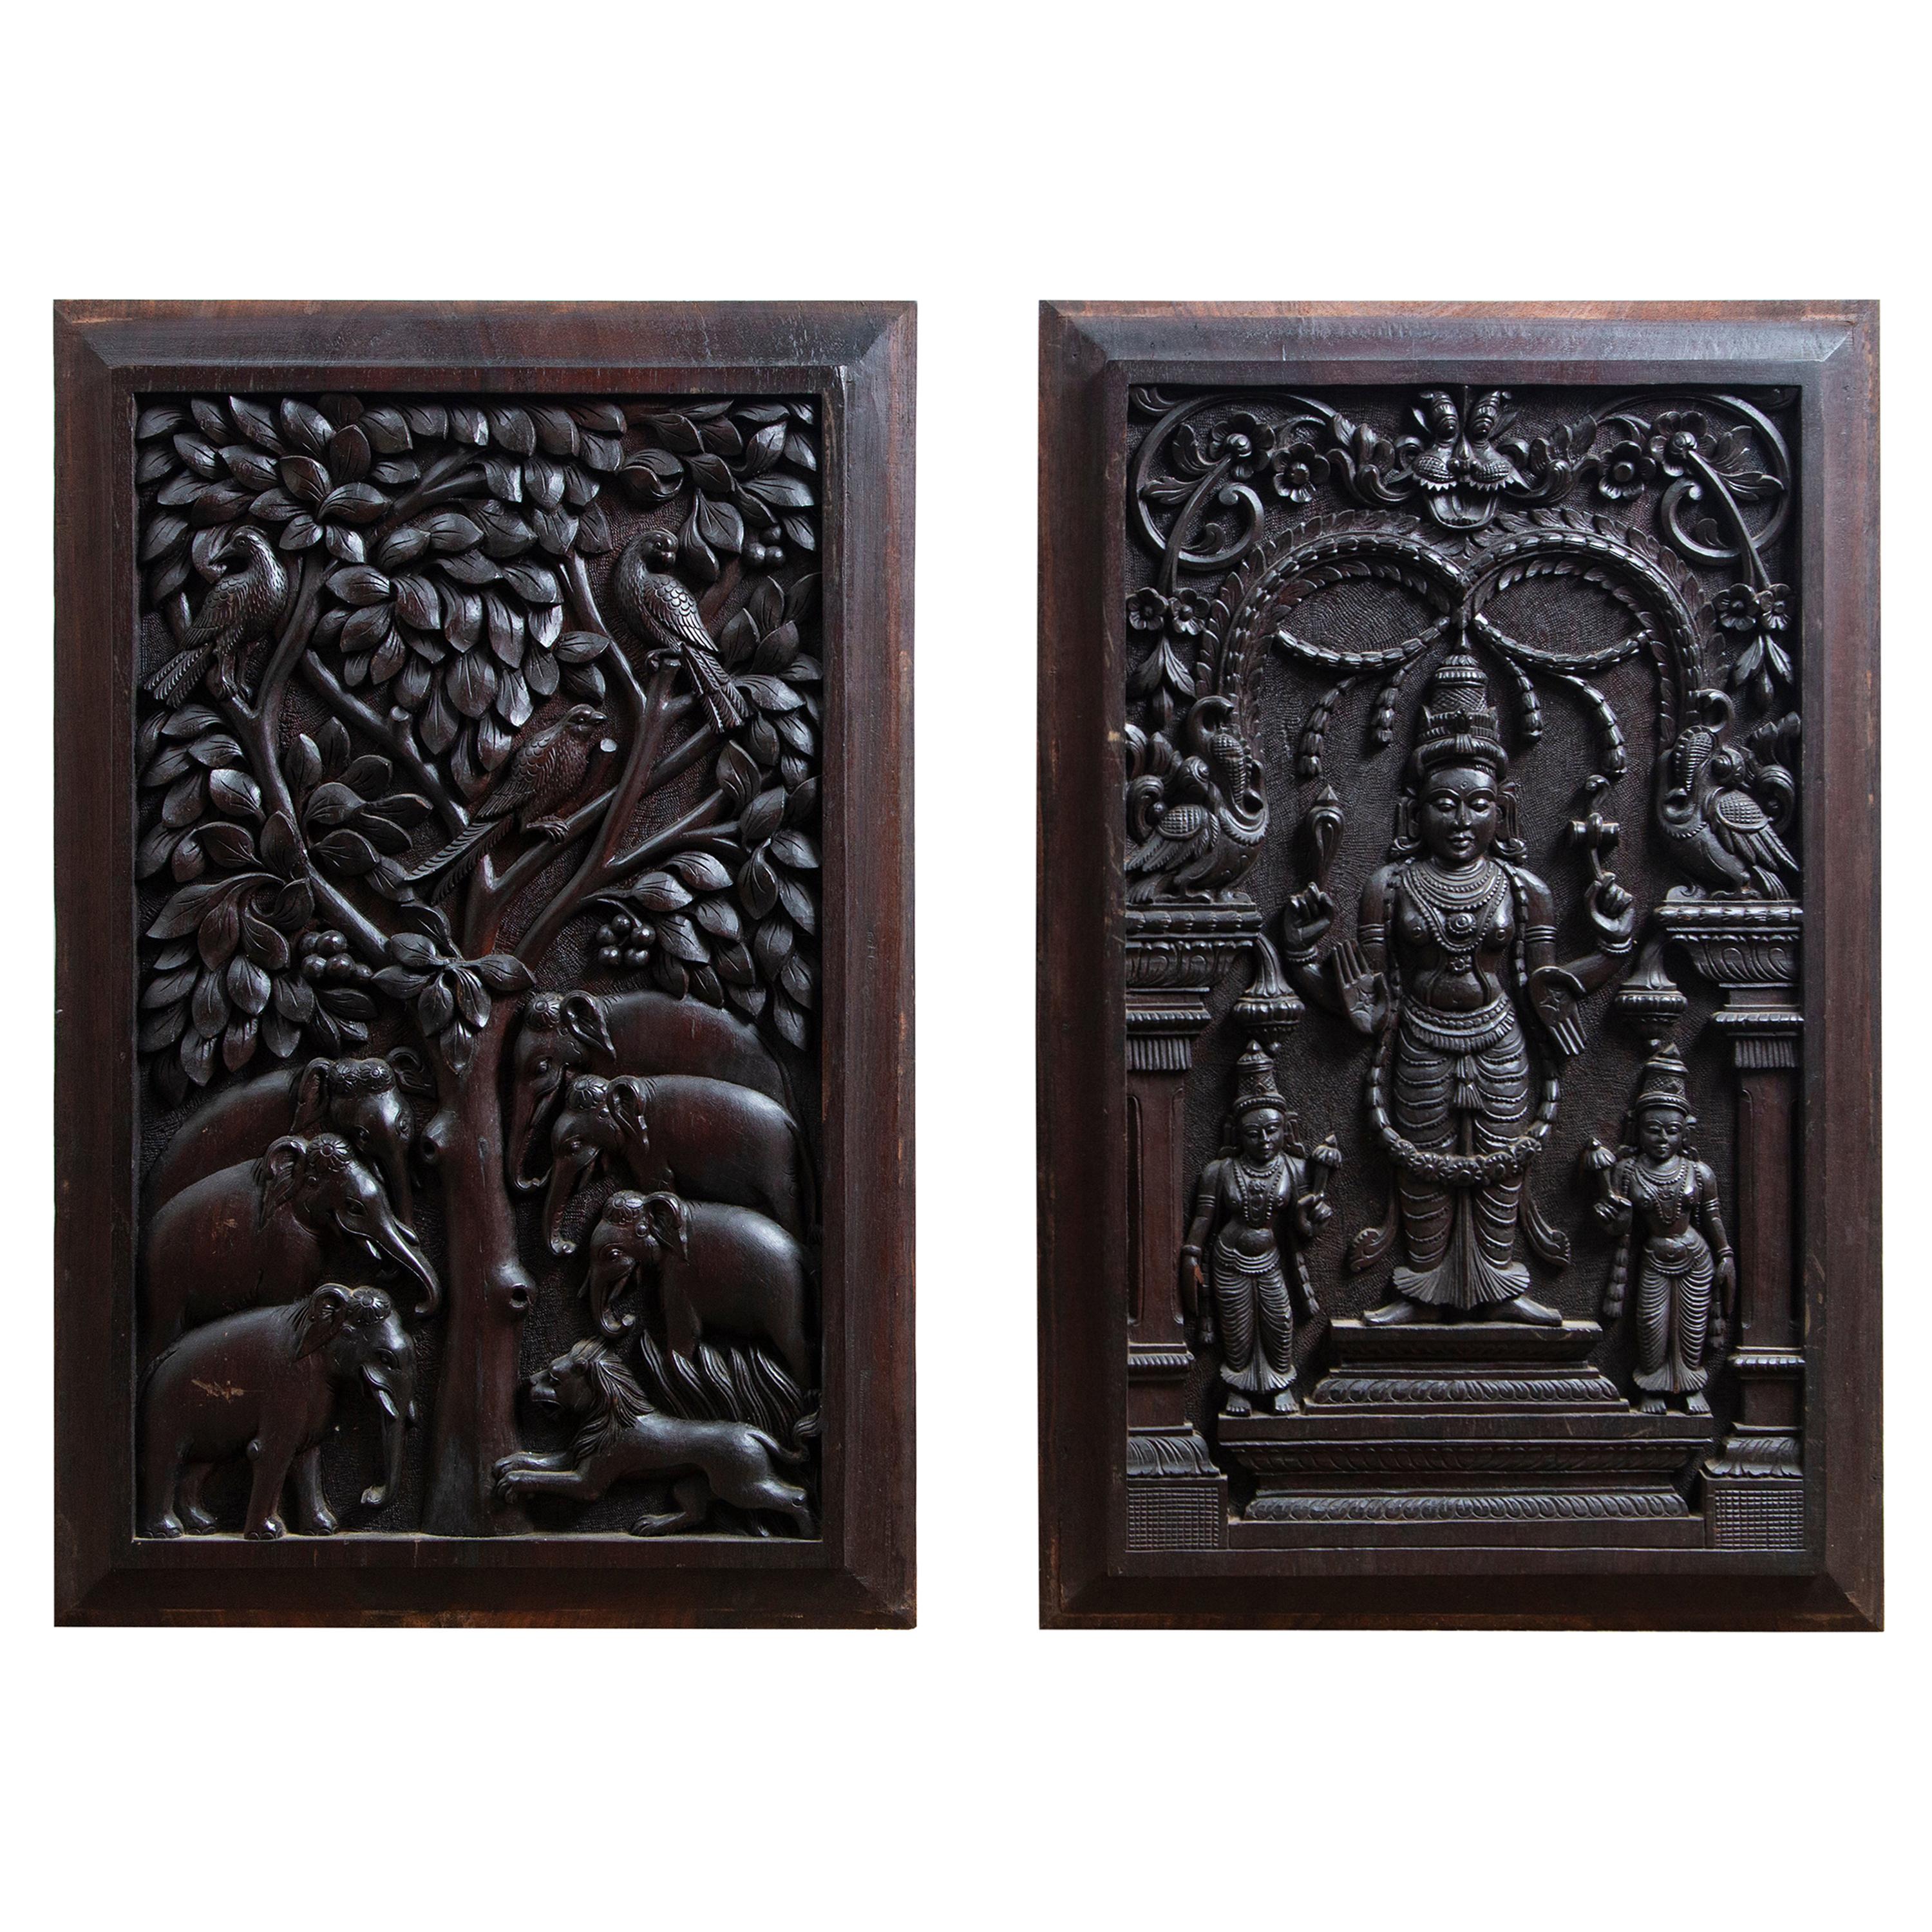 Antique Indian wall panel Super fine intricate carving on Rosewood 67cm long 16 w. Great for your interior wall decor A collectors piece